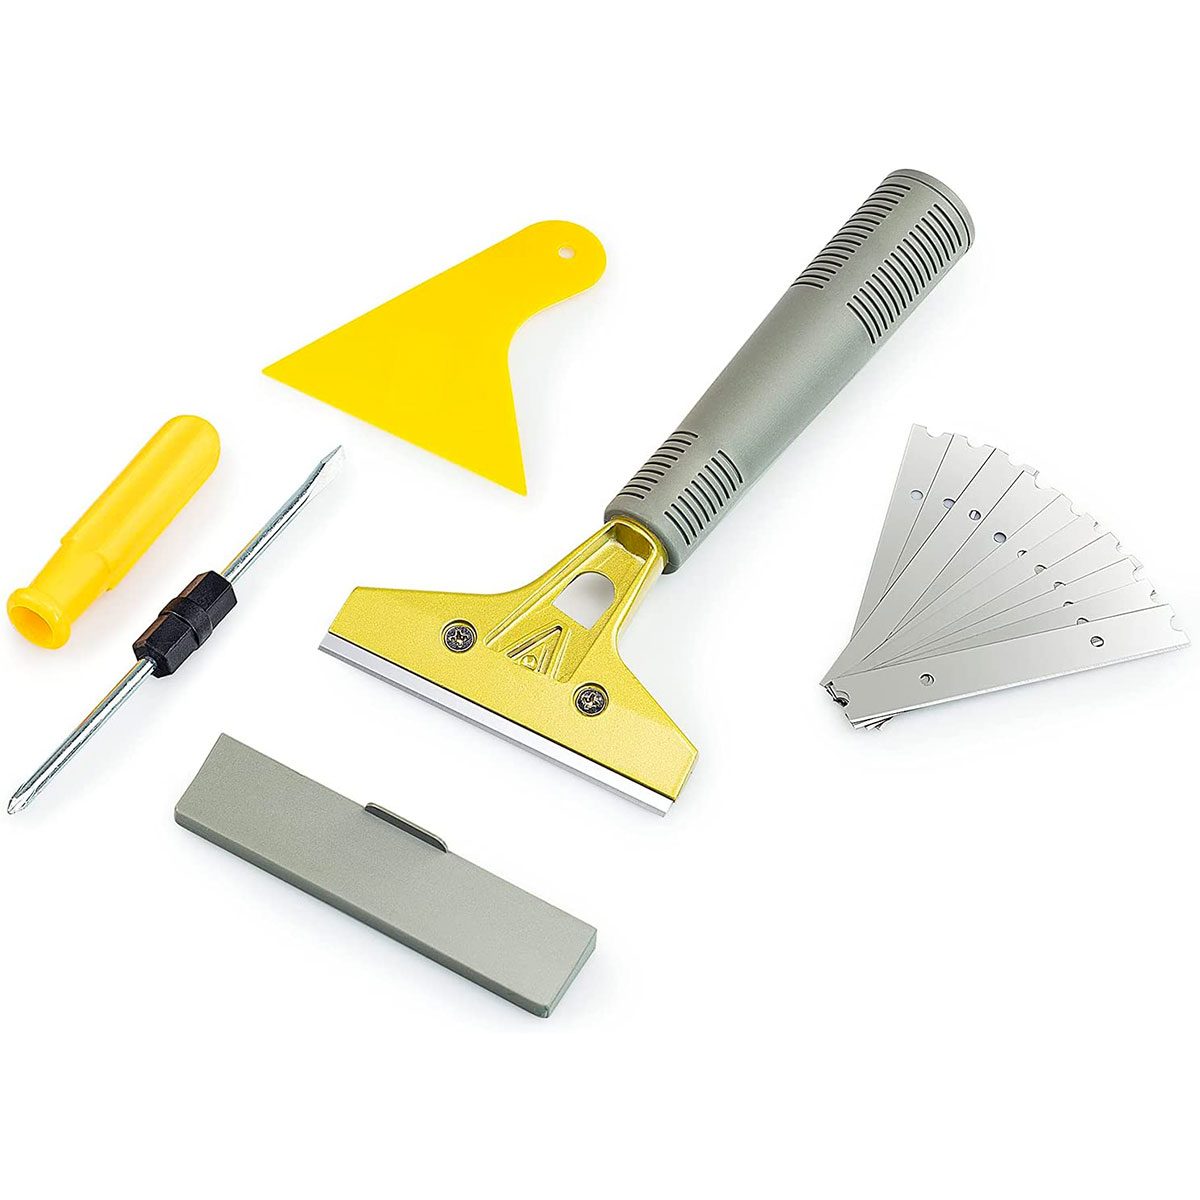 10 Must Have Window Cleaning Tools [Rated by Window Cleaners]